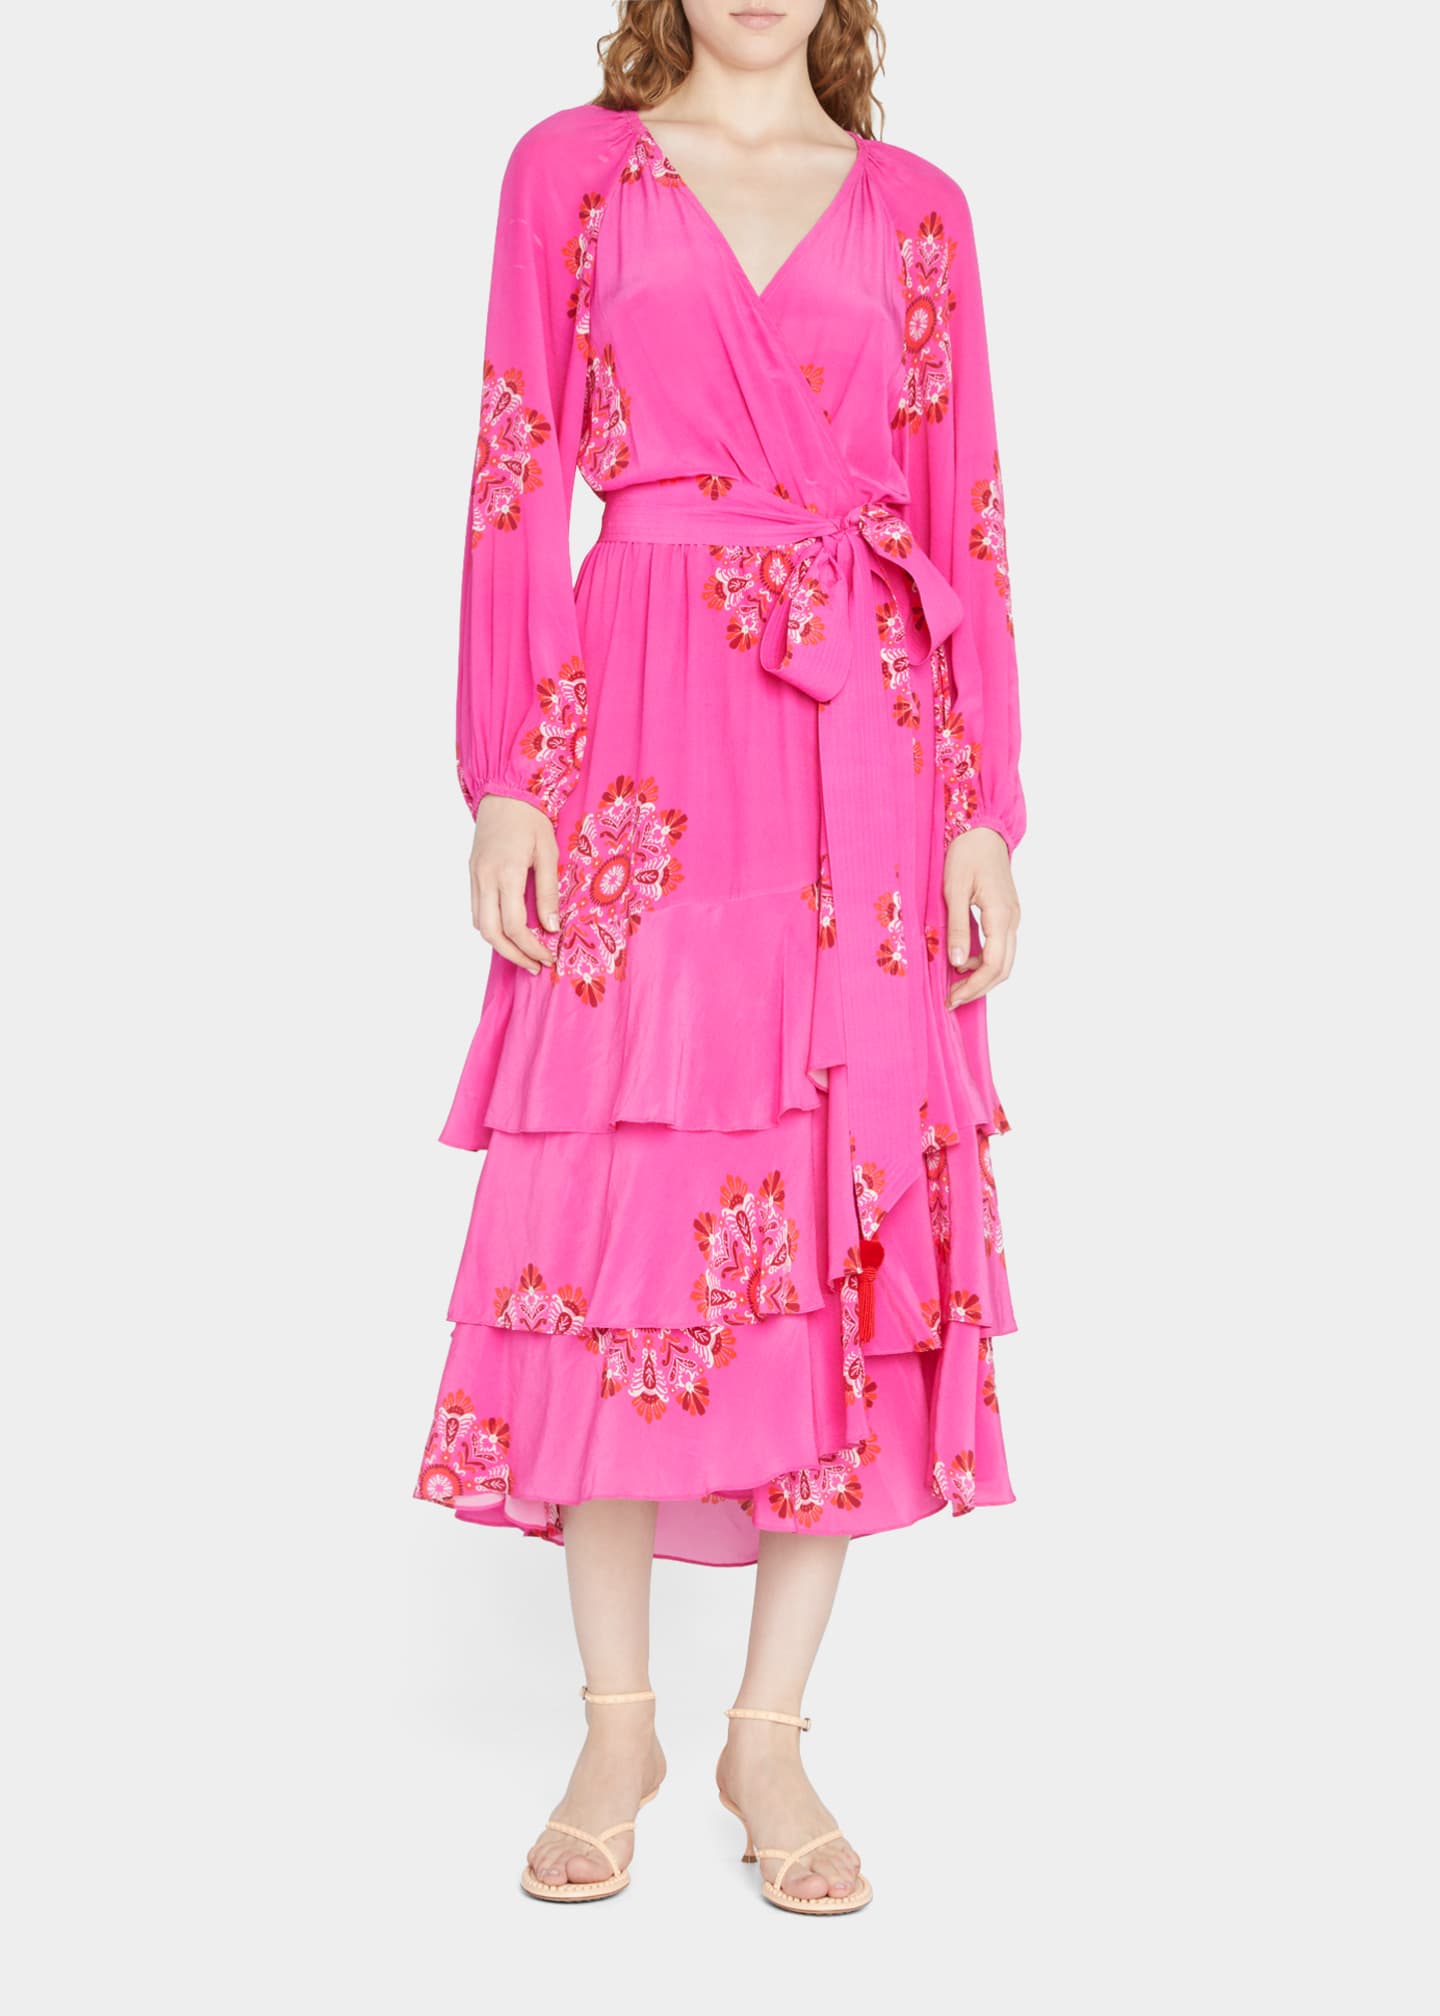 Figue Frederica Printed Tiered Ruffle Belted Dress - Bergdorf Goodman